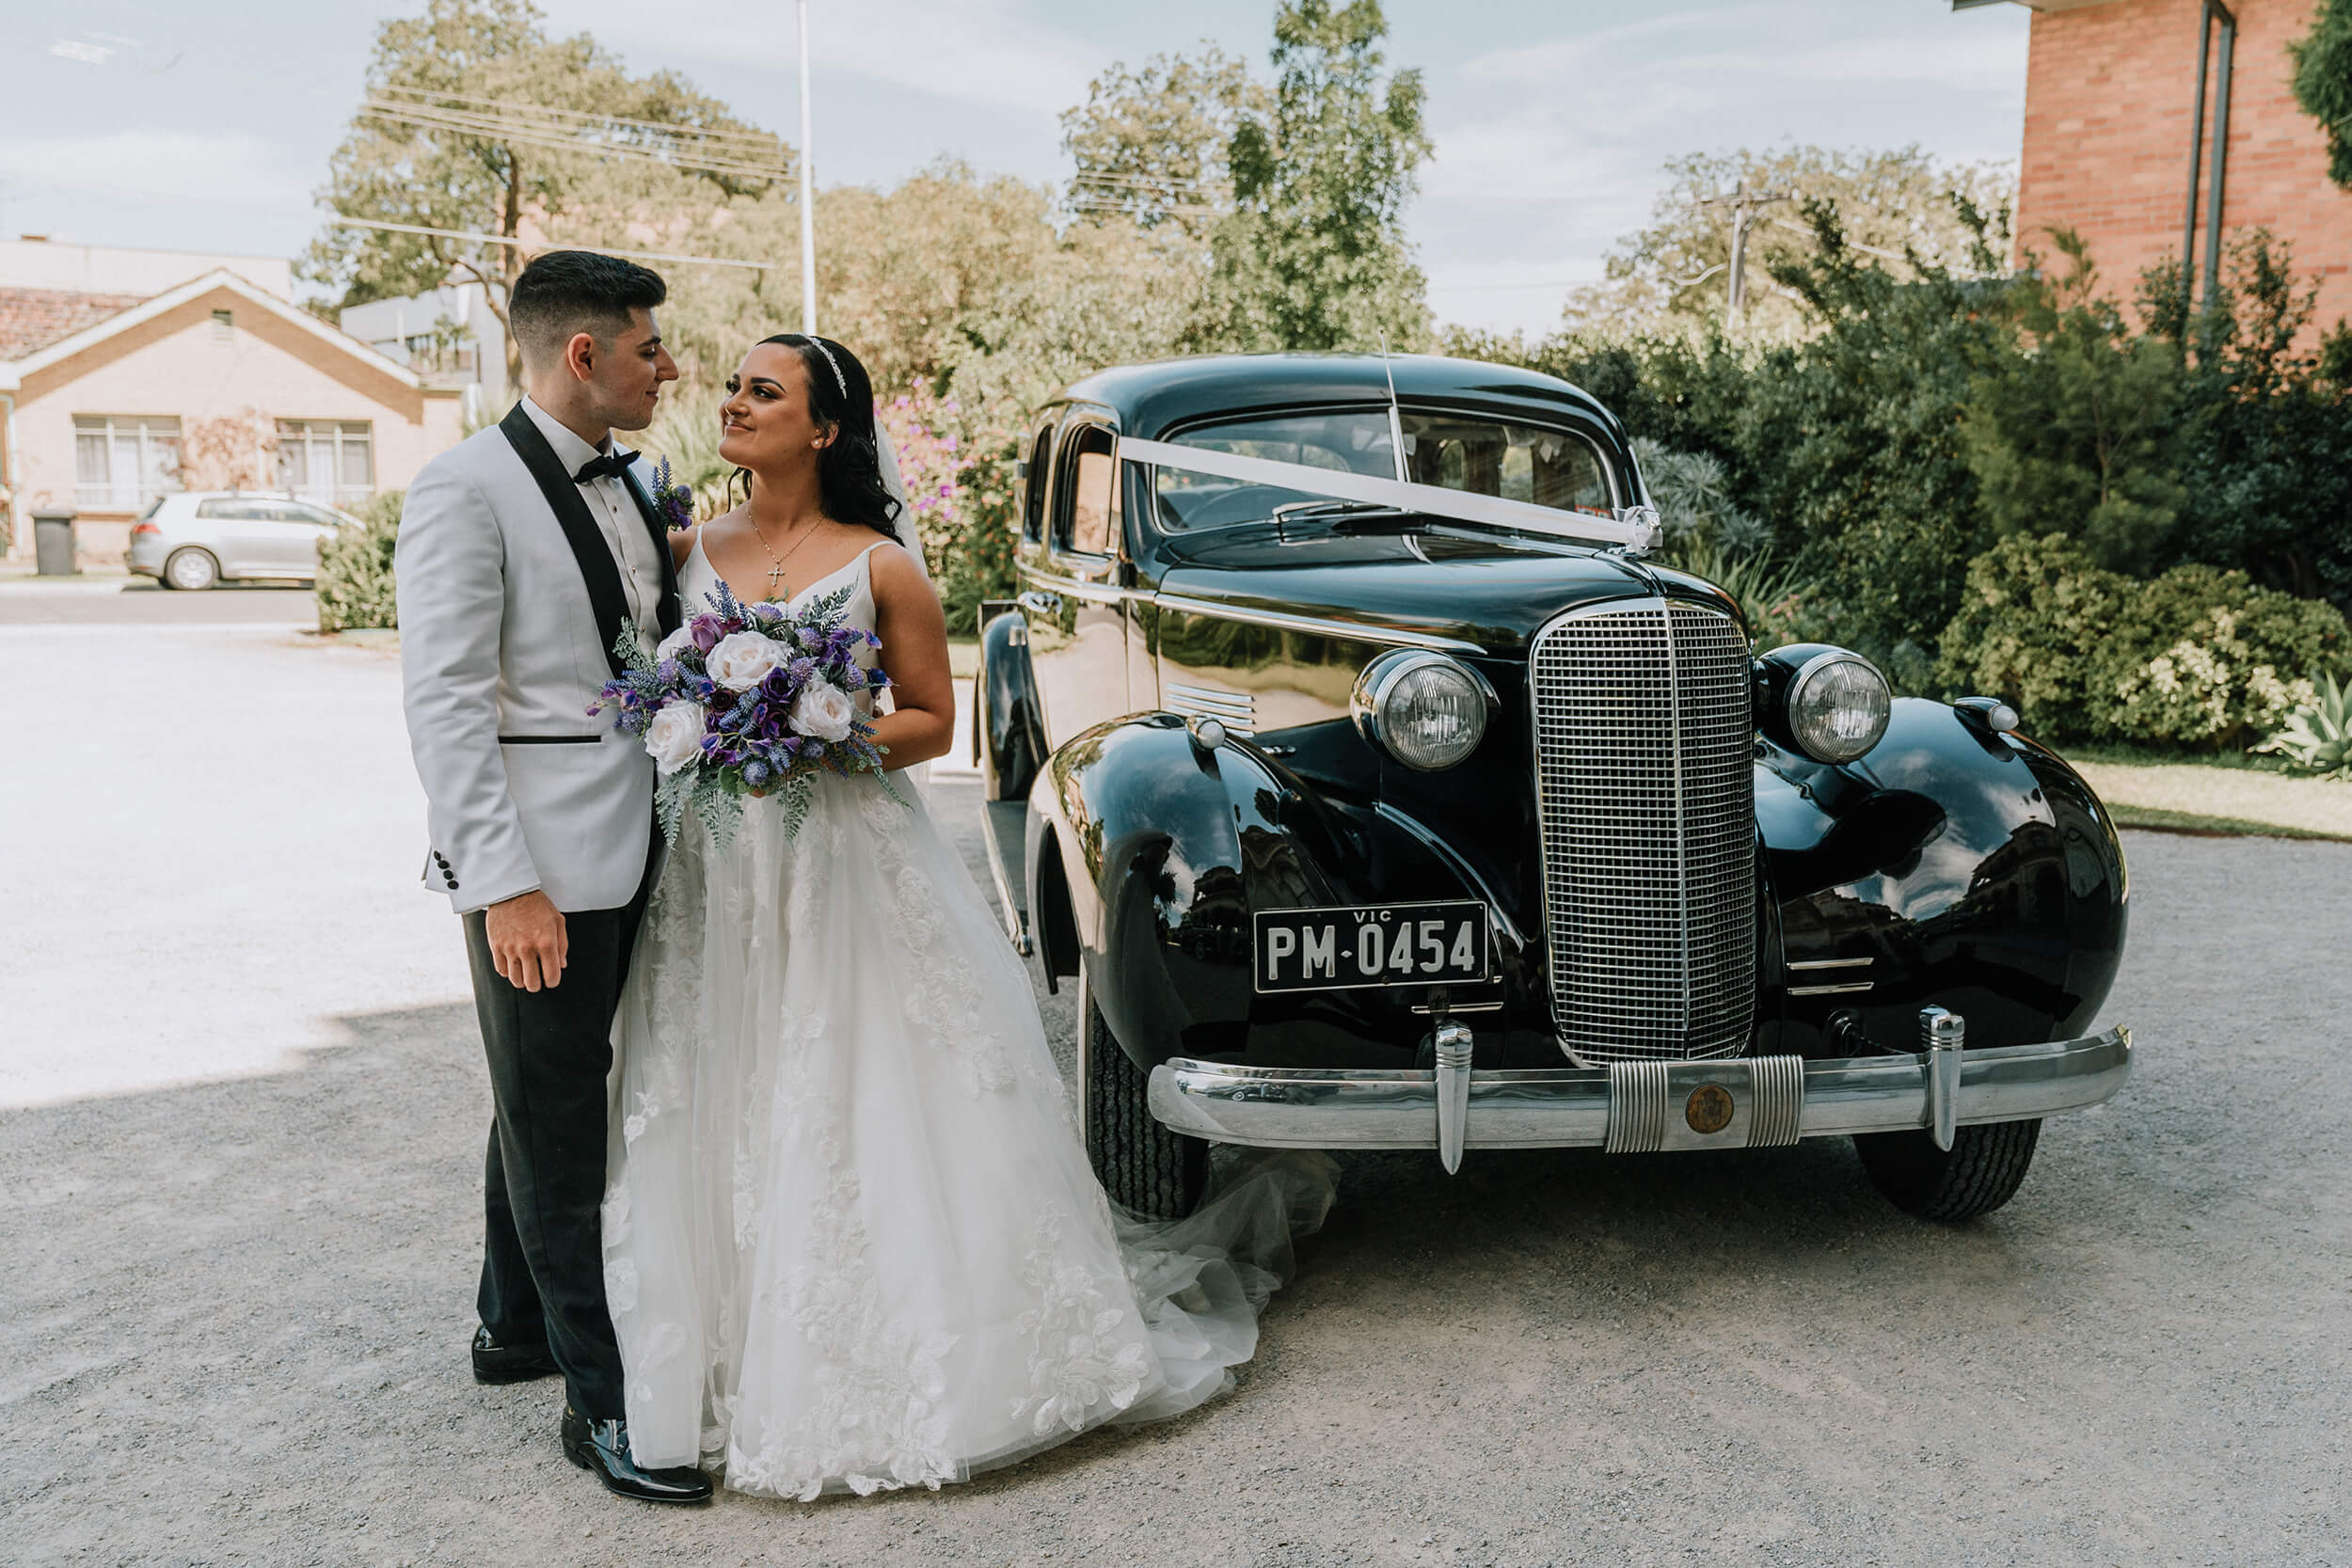 Get a wedding car, Bride and groom happily poses beside a black vintage cadillac. captured by Black Avenue Productions